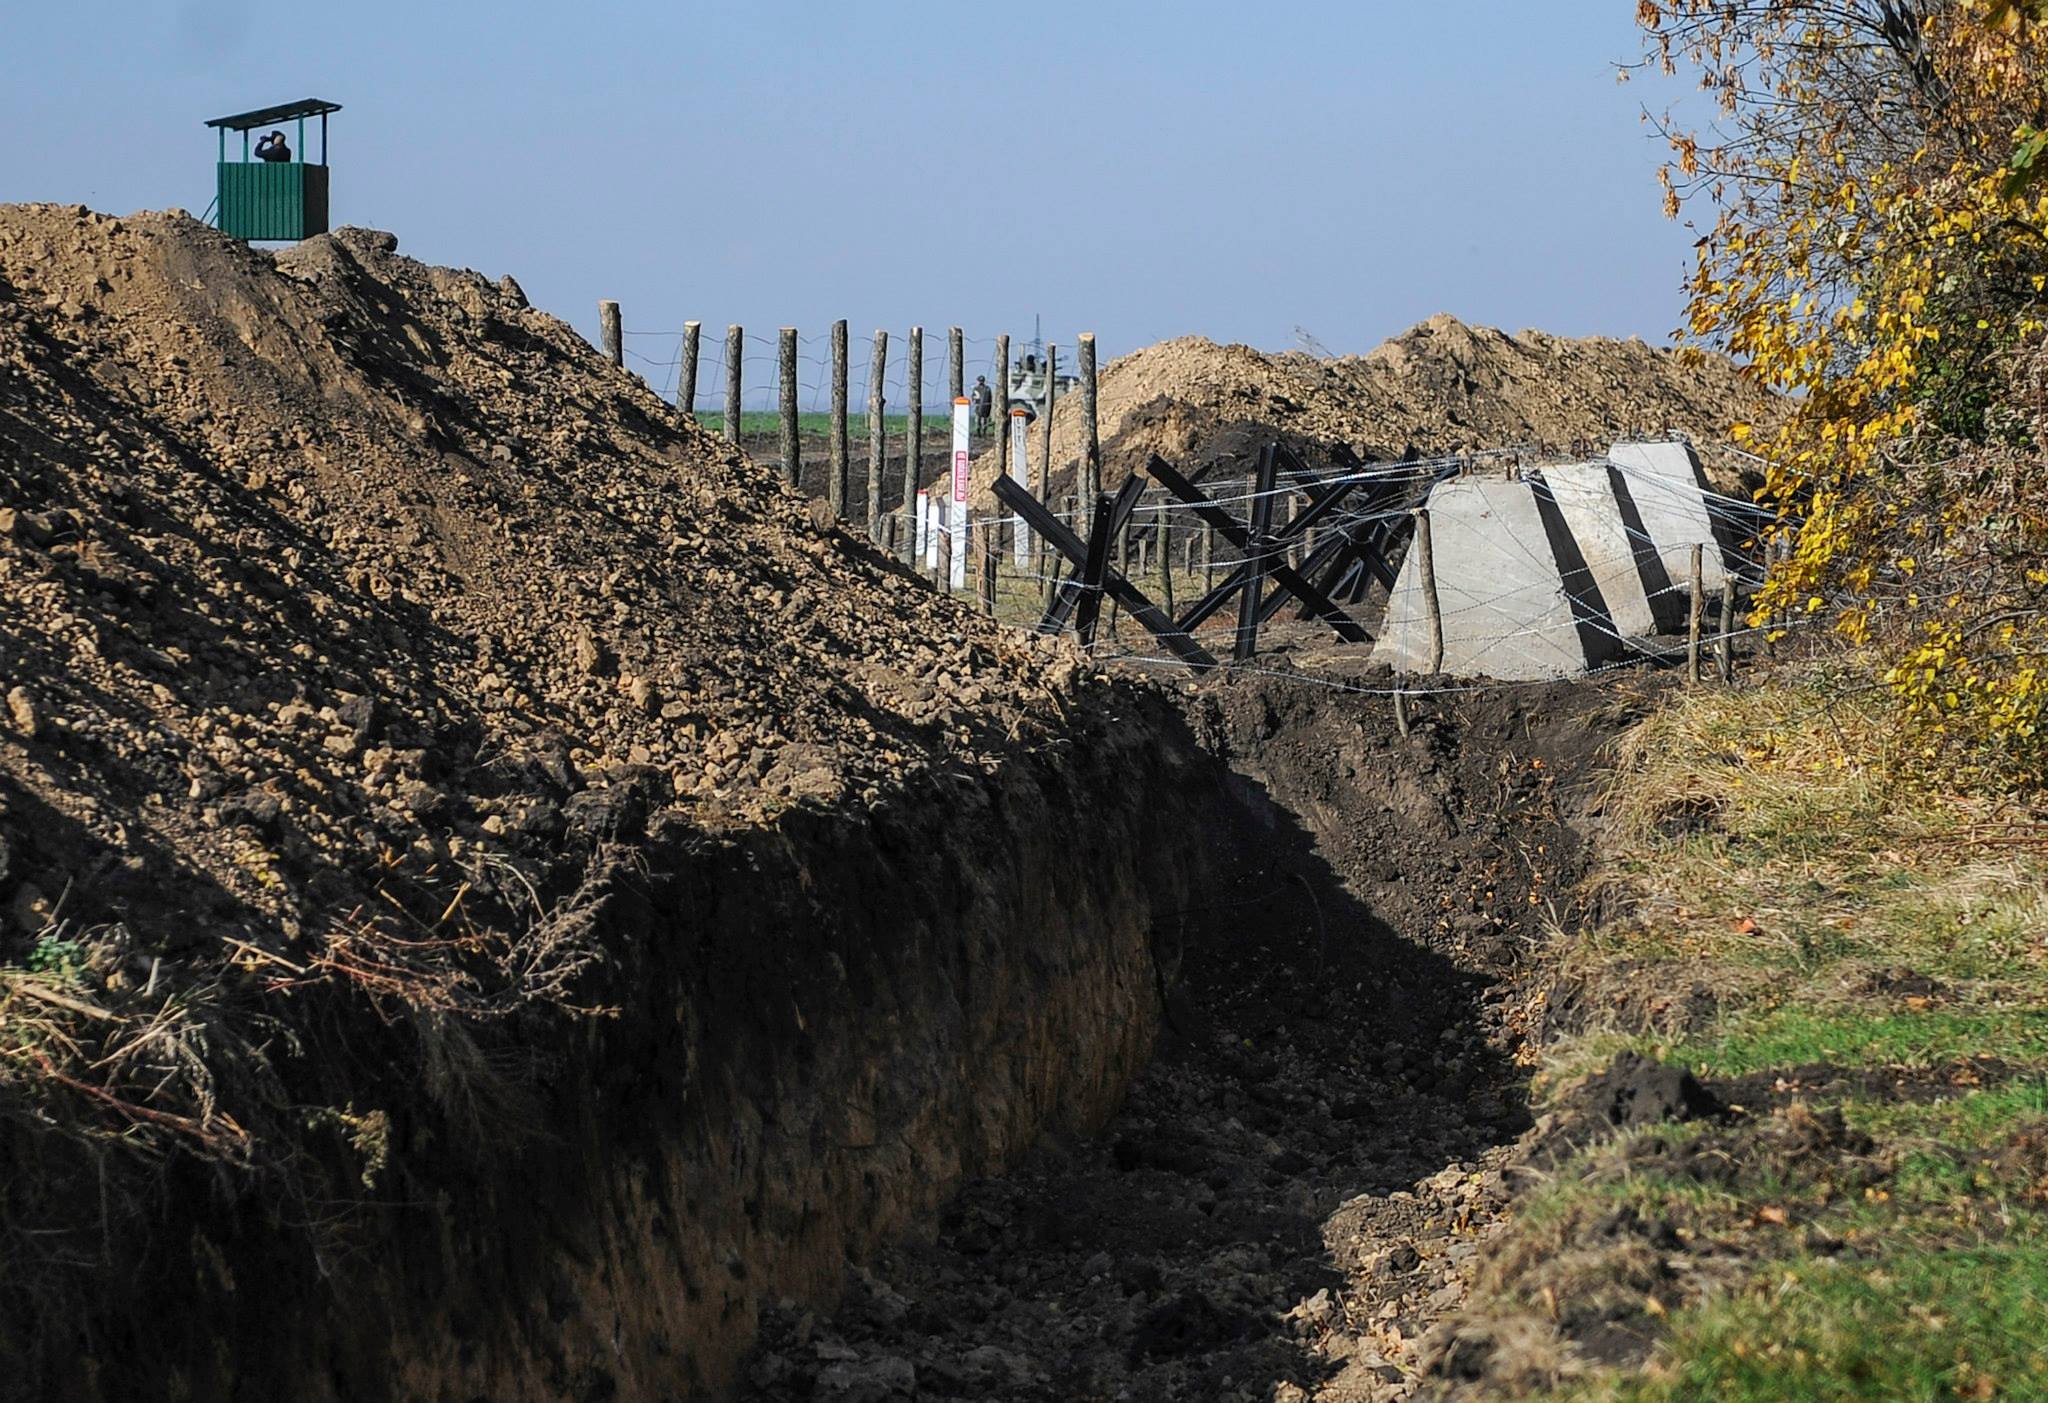 Ukraine builds a ‘European bulwark’ to separate itself from aggressive Russia ~~